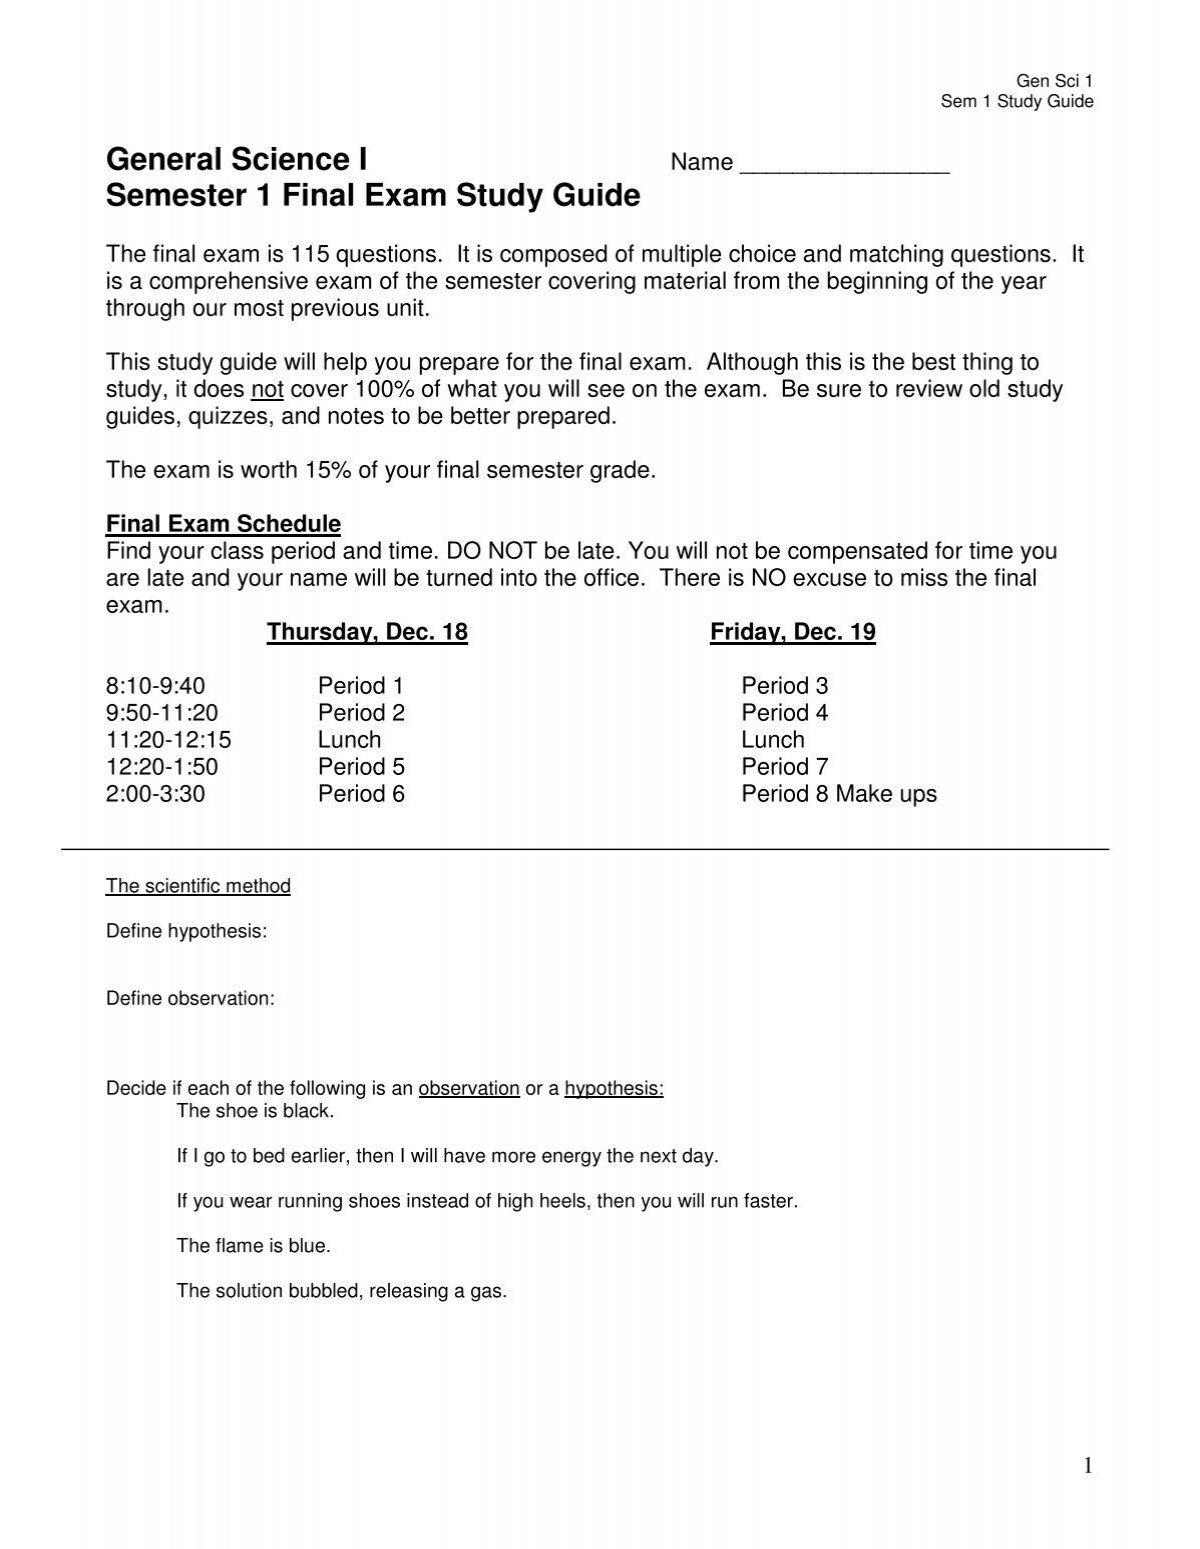 Final Quiz Study Guide - Study Guide Final Quiz December 1 Be sure